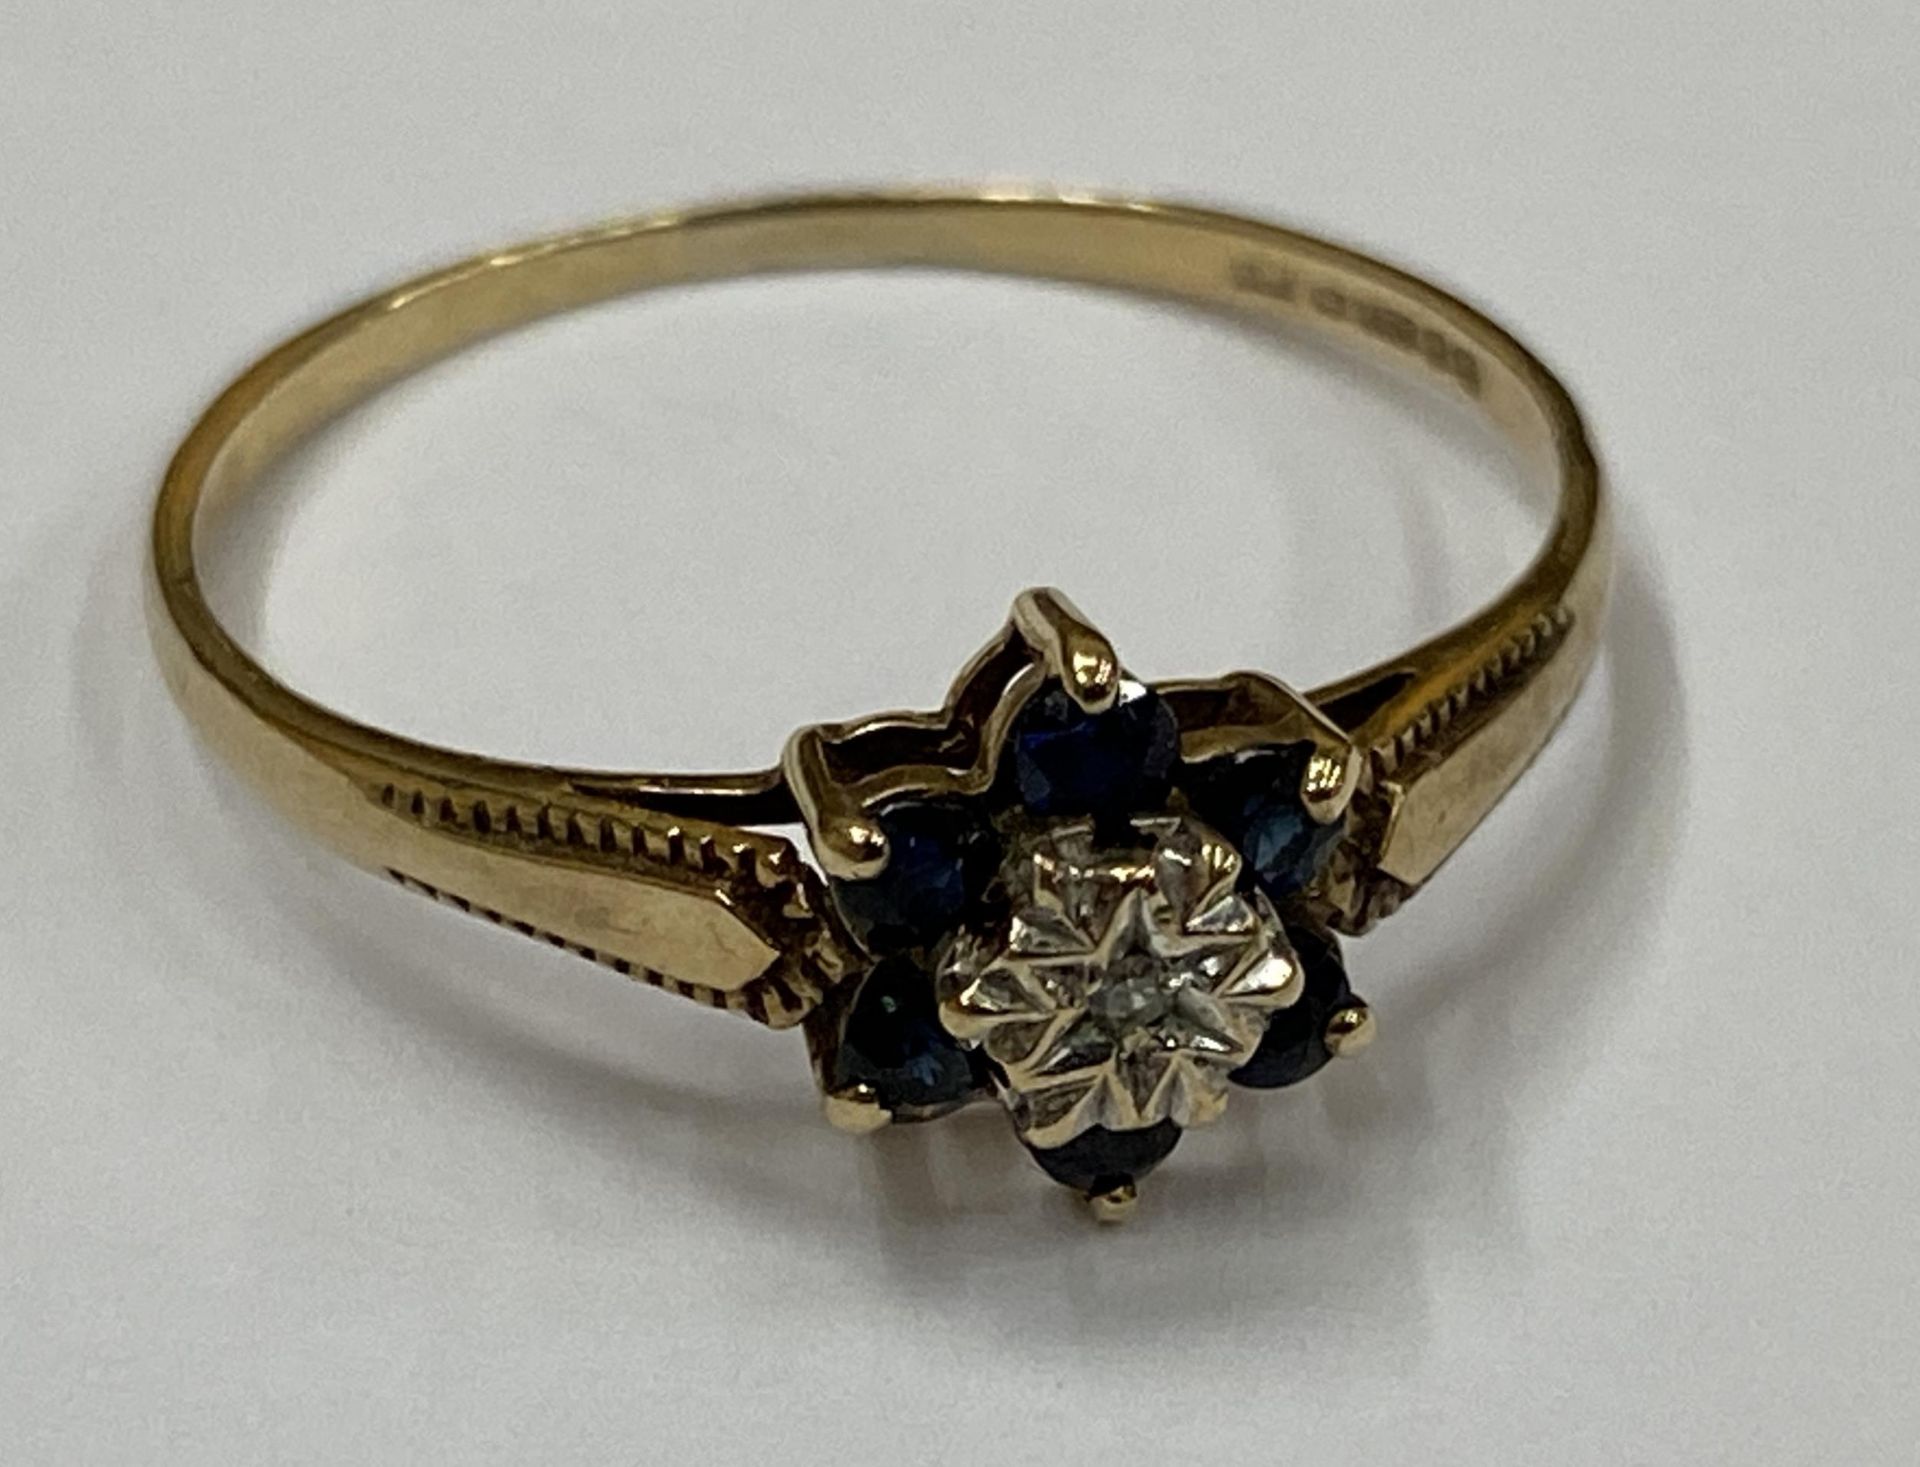 A 9CT YELLOW GOLD RING WITH DIAMONDS AND SAPPHIRES, WEIGHT 1.4G